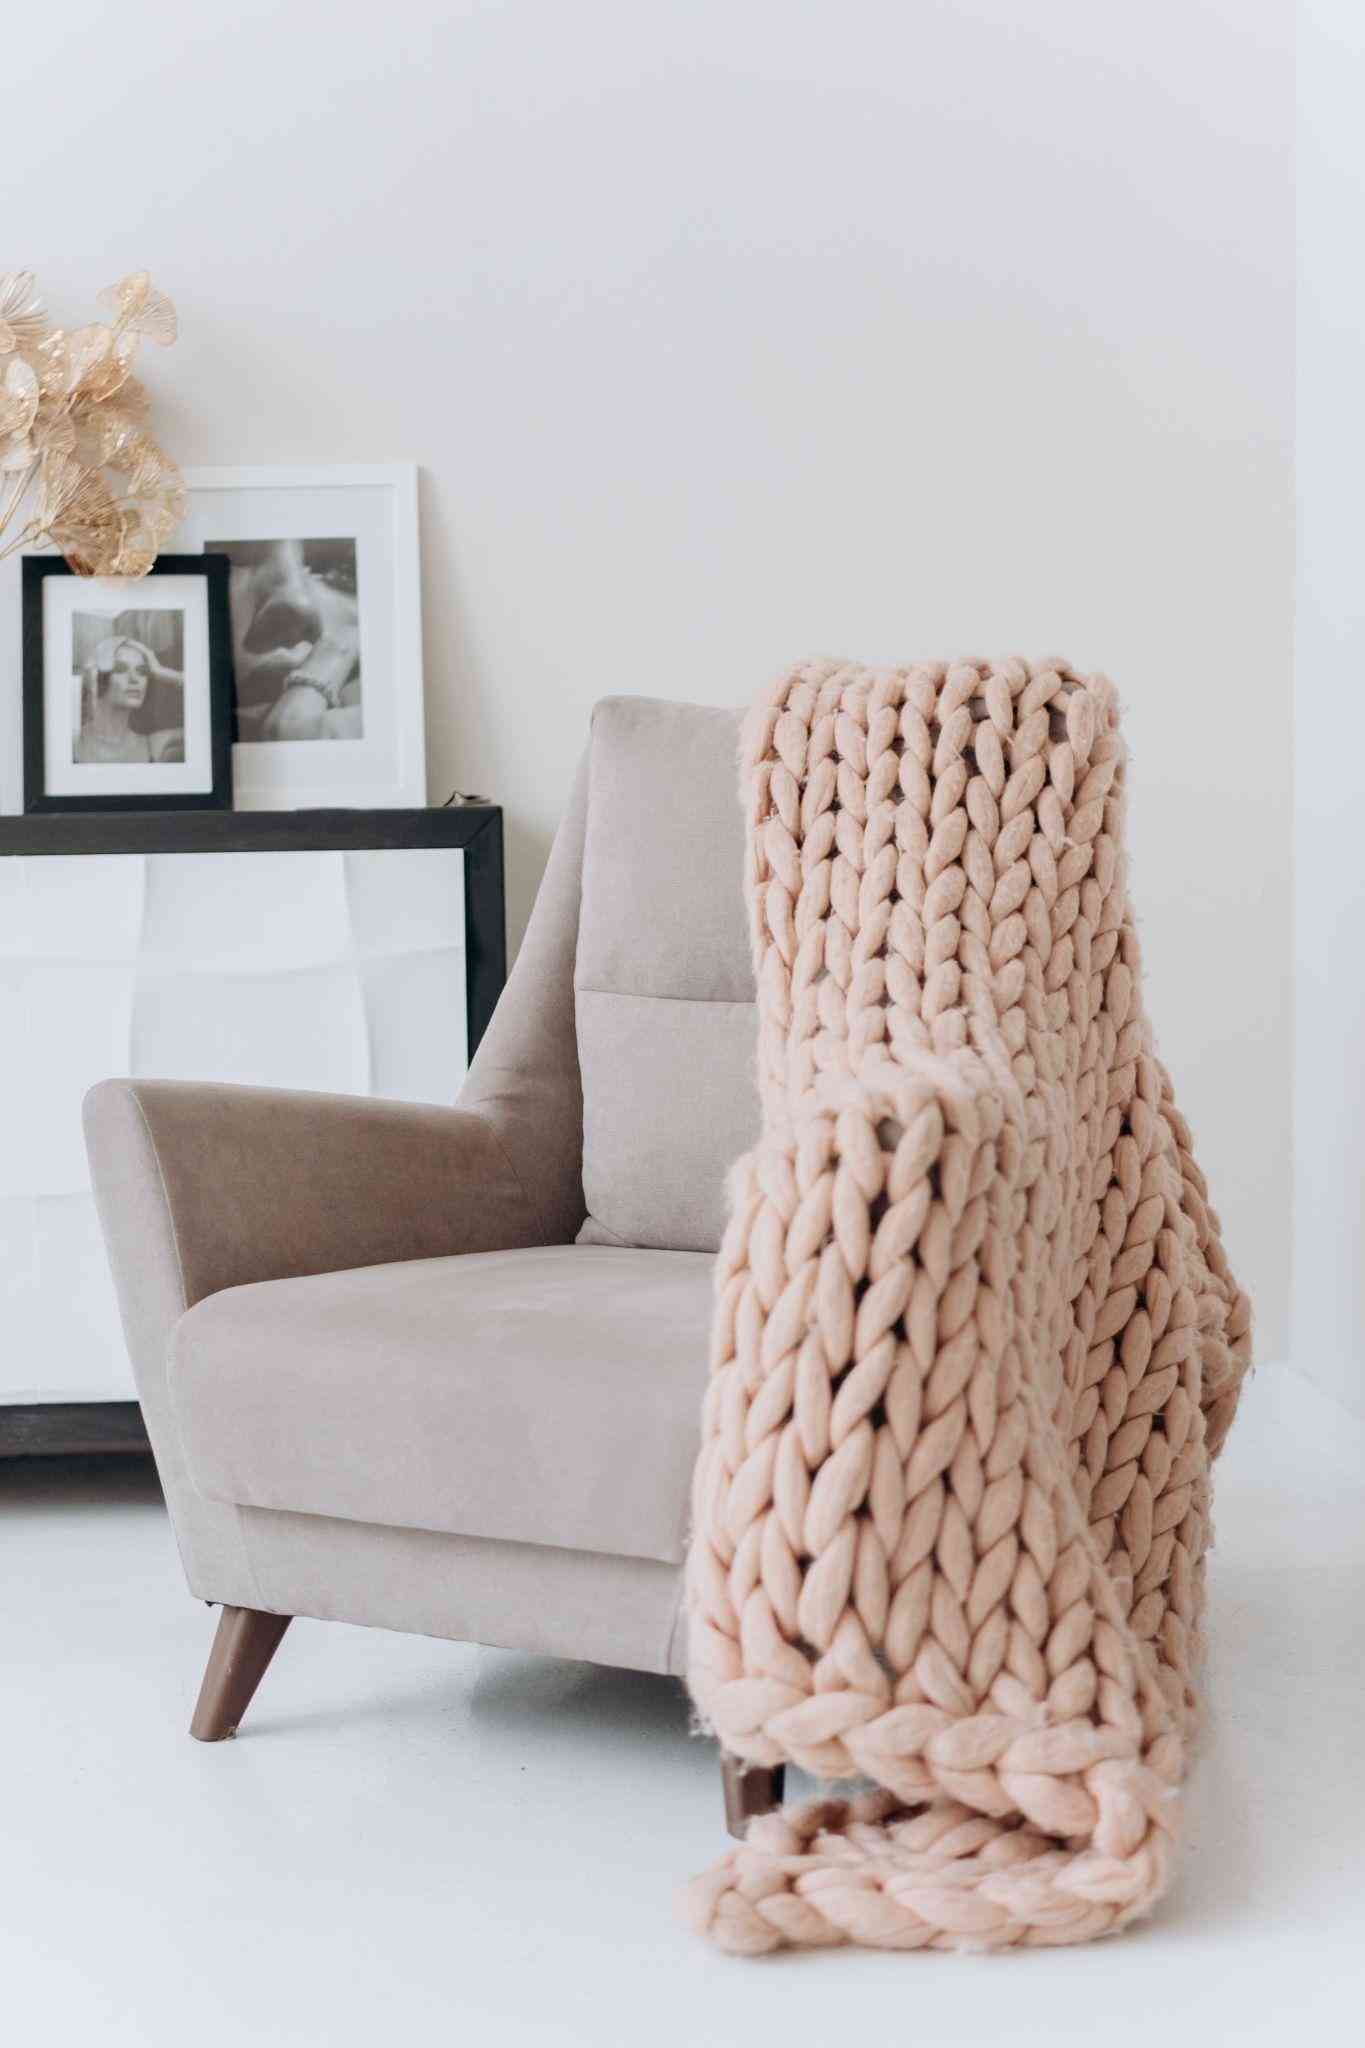 Soft Cozy Chair - To create perfect reading corner at home